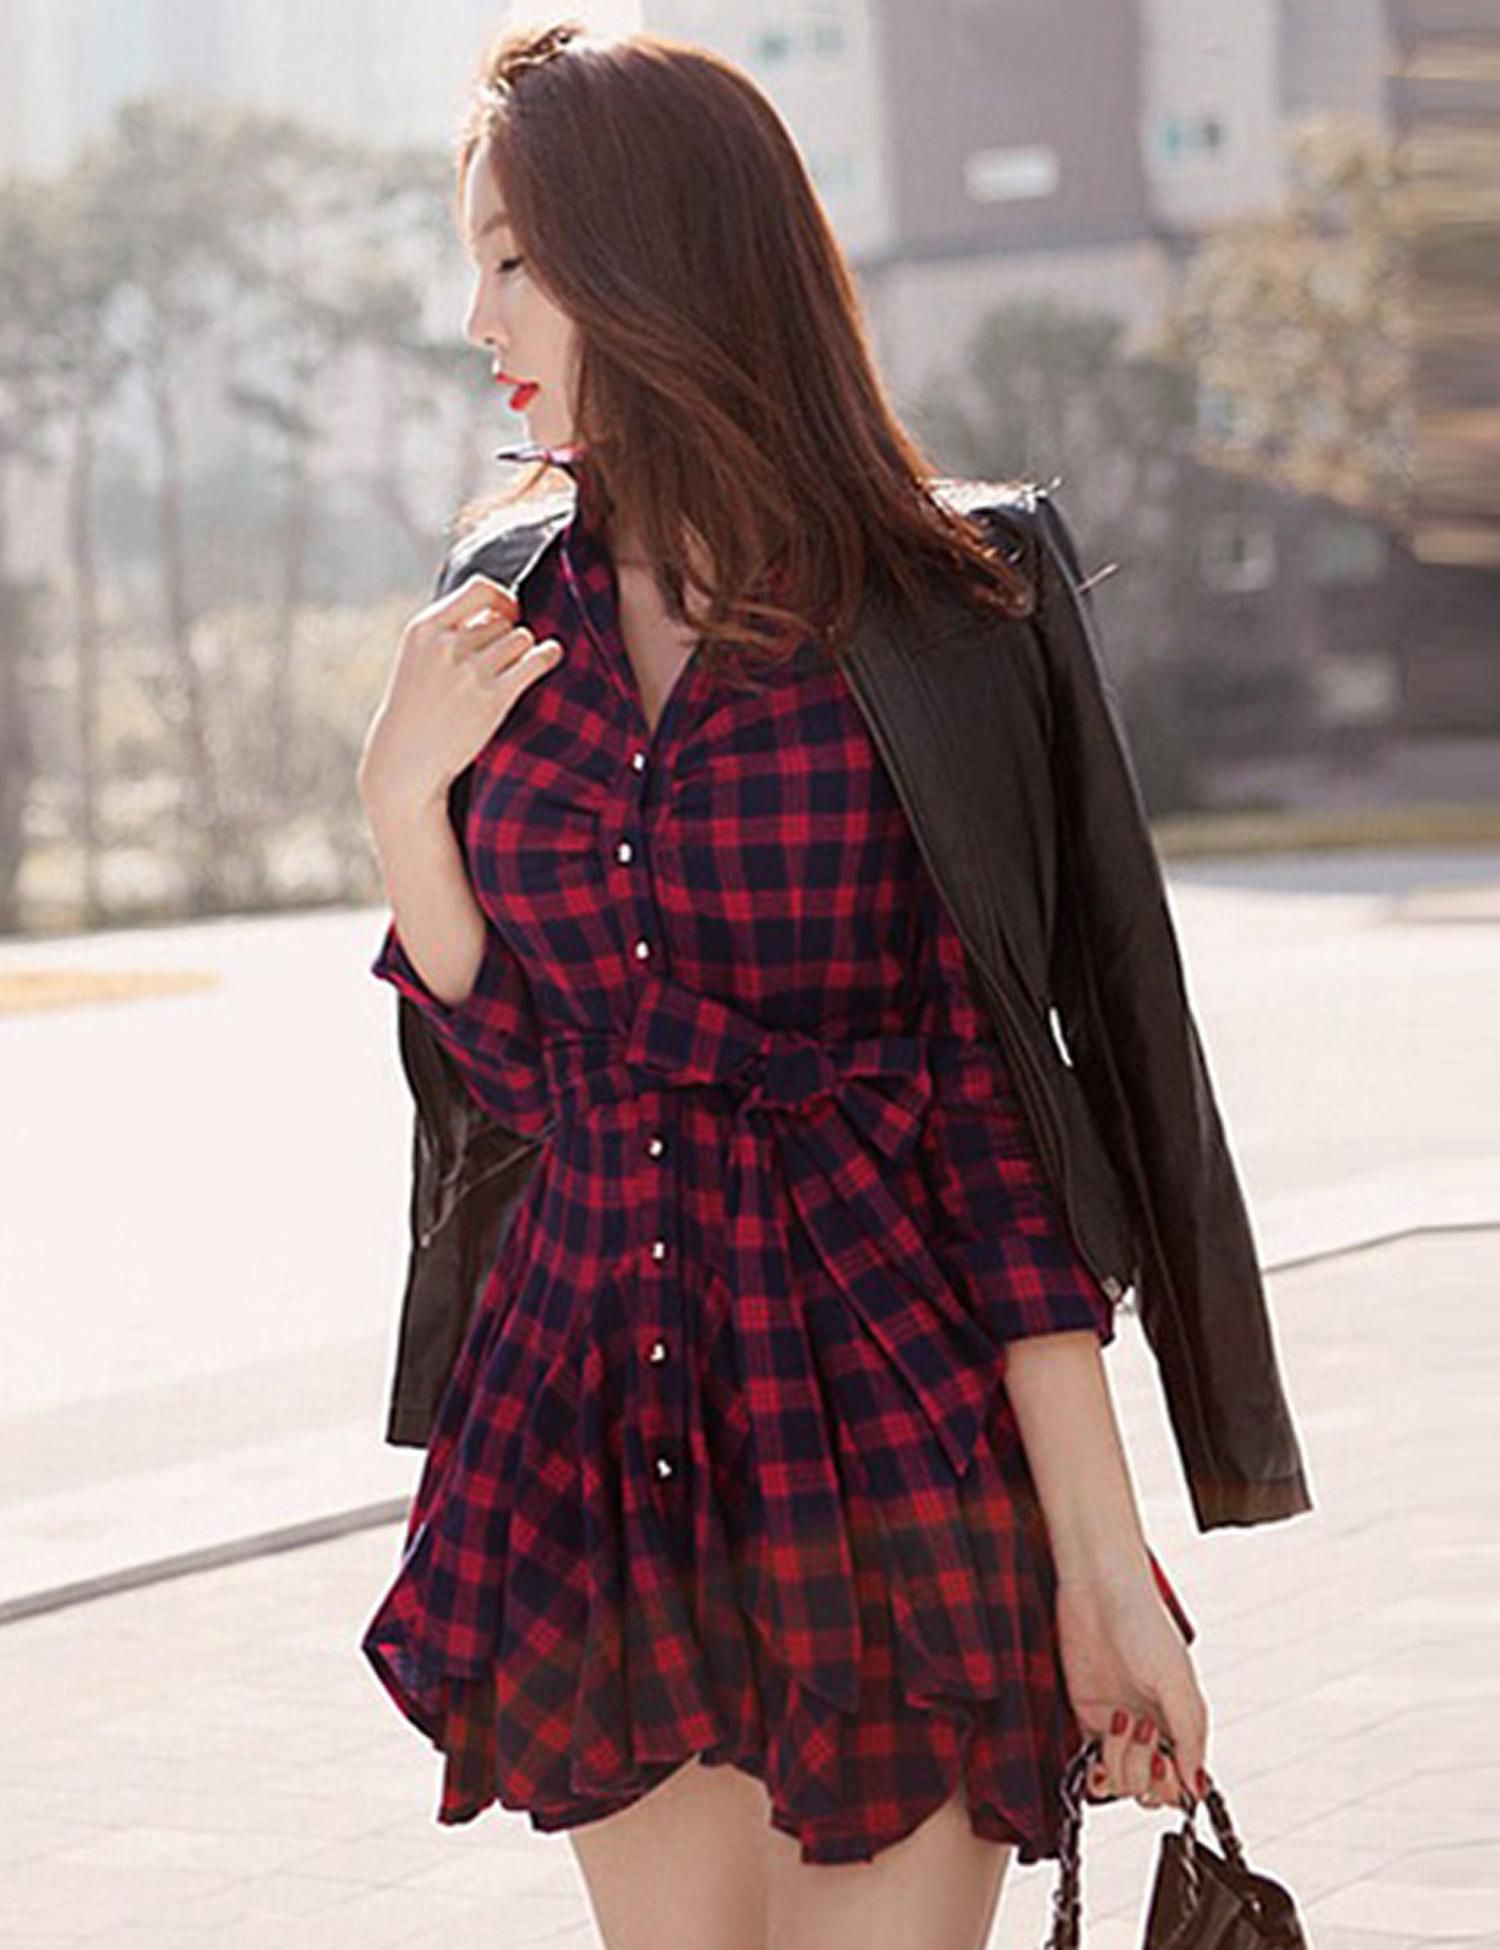 Red checked dress - Buy Red checked dress Online at Best Prices in ...